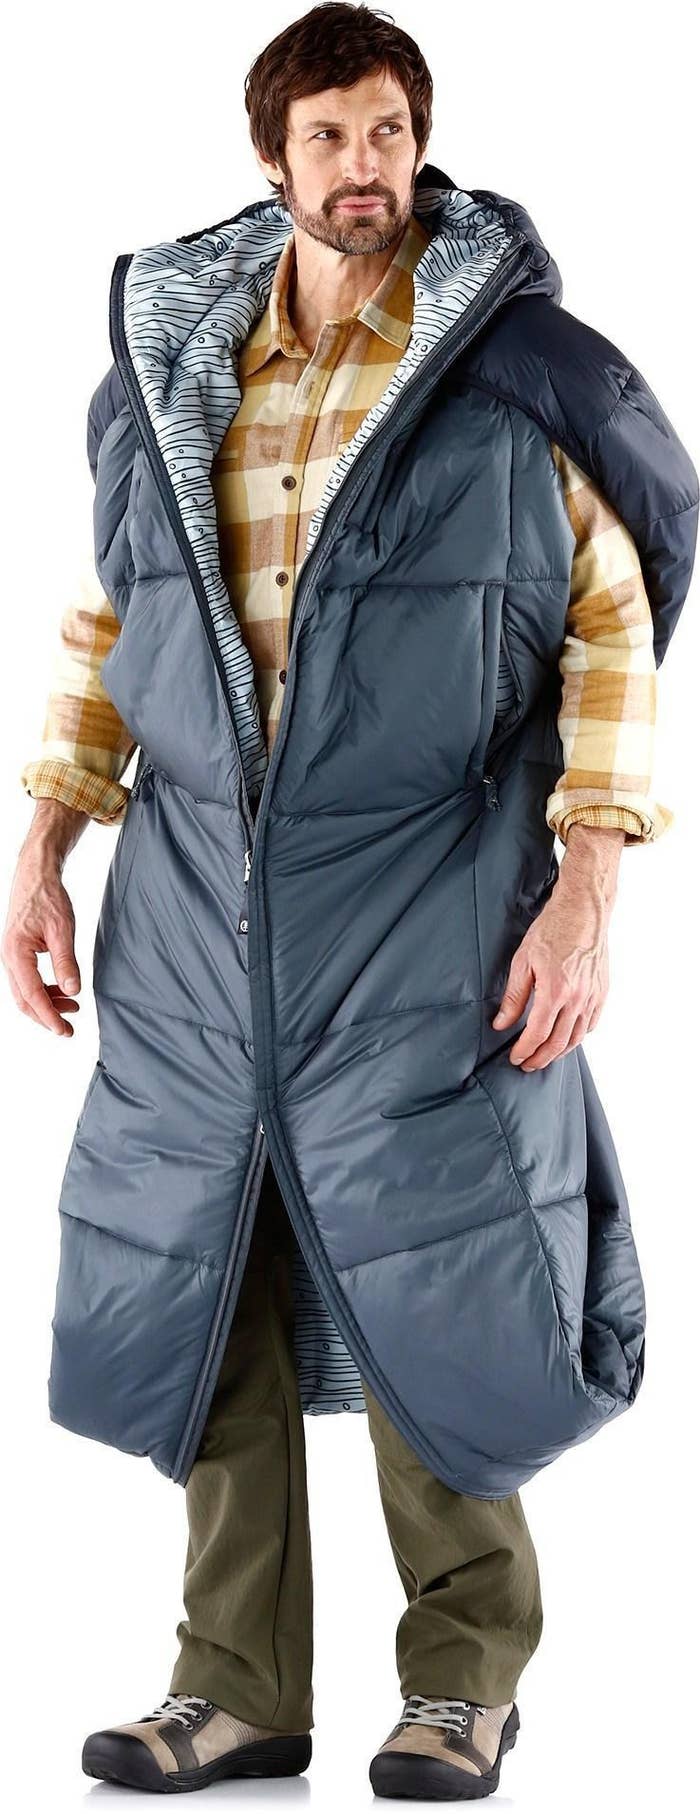 19 Ways To Not Look Like A Giant-Ass Sleeping Bag This Winter